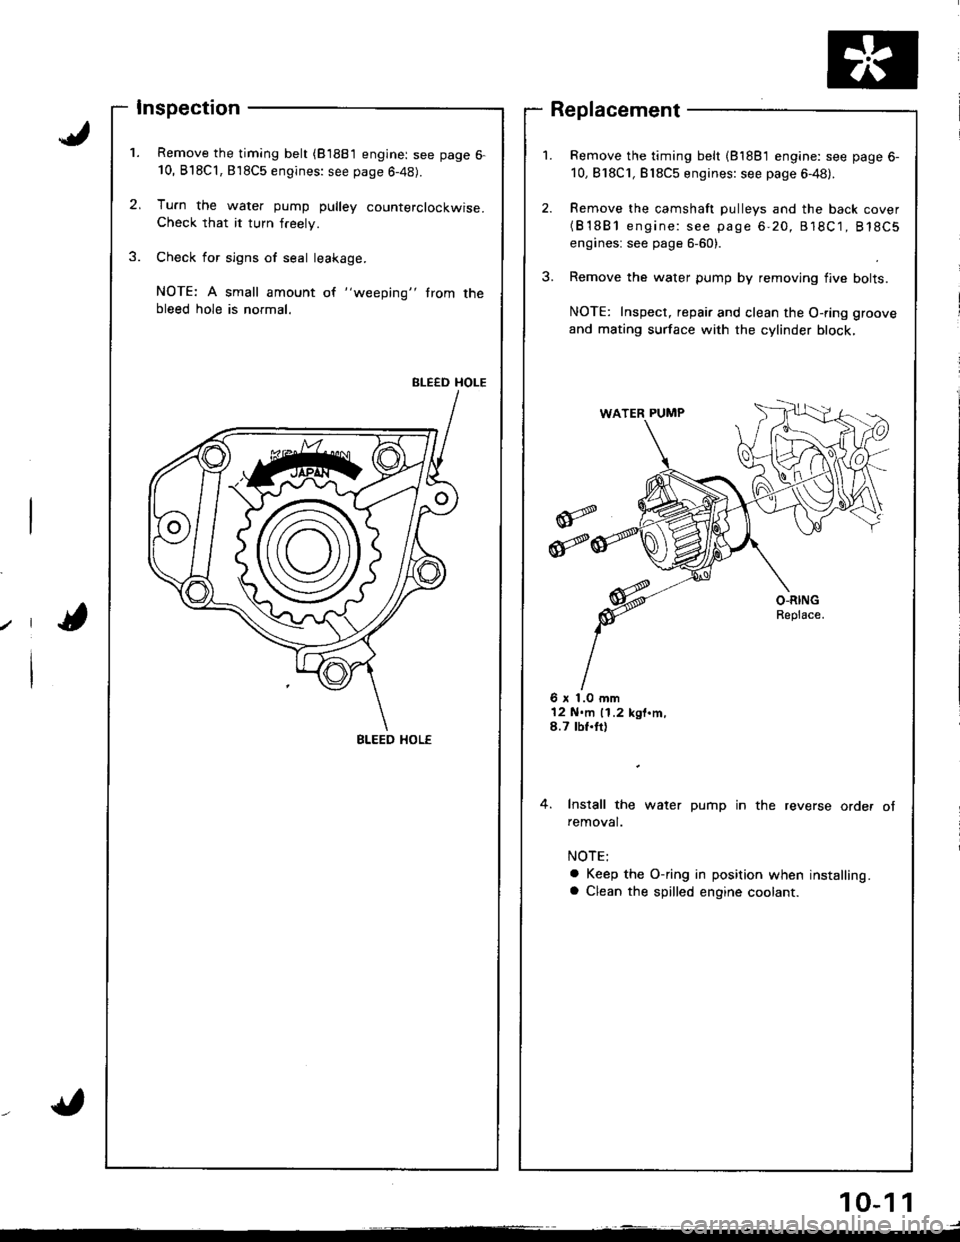 HONDA INTEGRA 1998 4.G Workshop Manual Inspection
Remove the timing belt (81881 engine: see page 6-10, Bl8Cl,818C5 engines: see page 6-48).
Tu.n the water pump pulley counterclockwise.Check that it turn freely.
Check for sign6 of seal lea